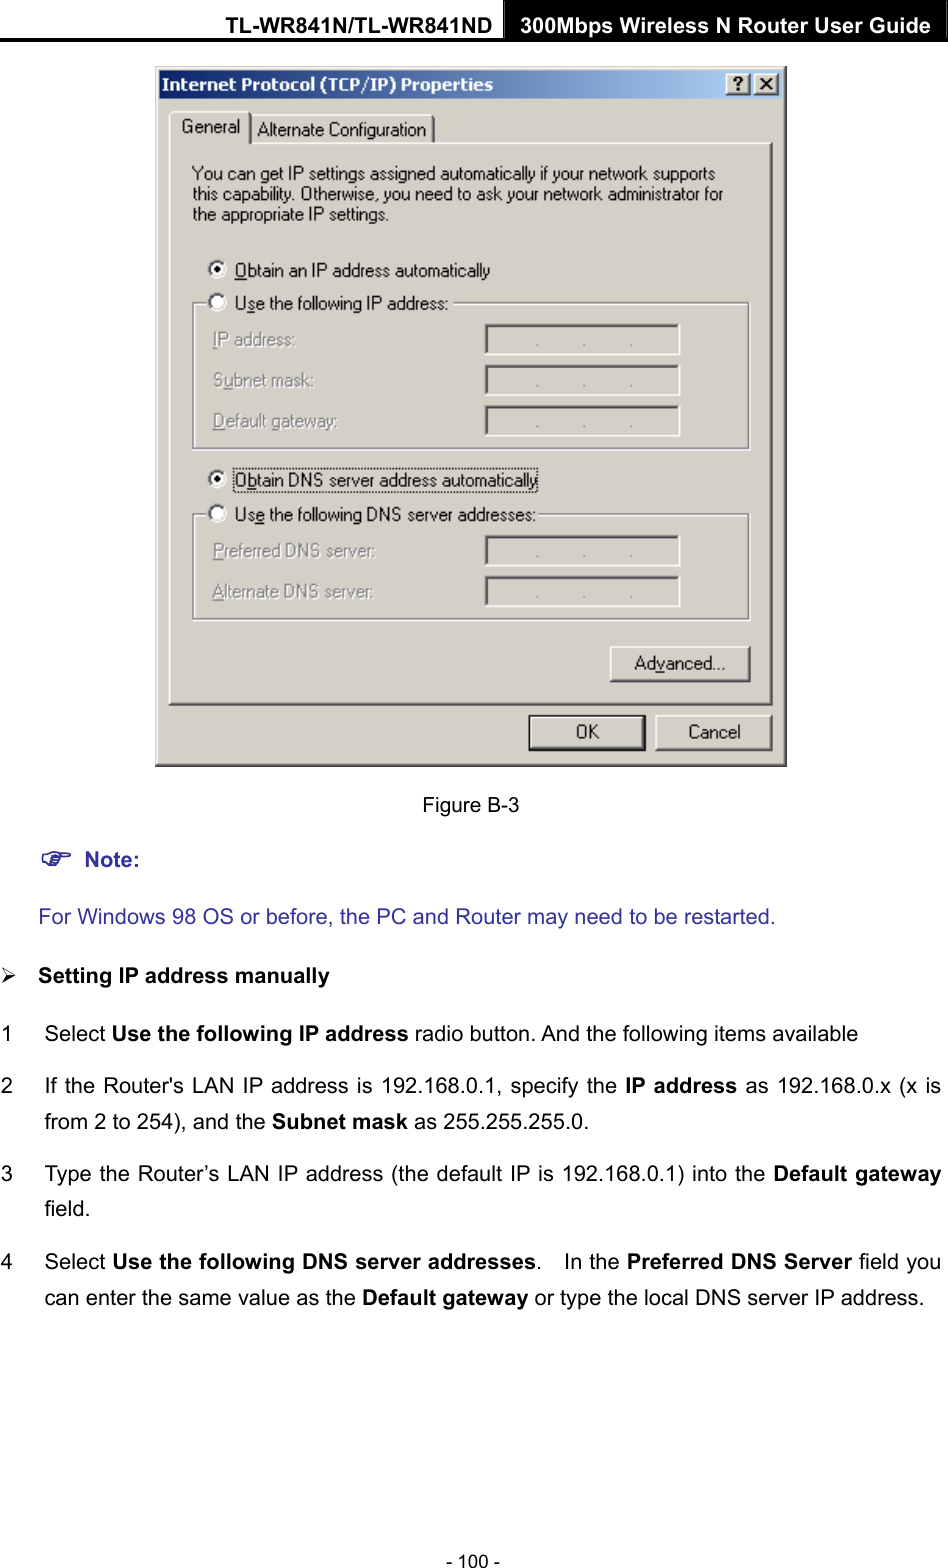 TL-WR841N/TL-WR841ND 300Mbps Wireless N Router User Guide - 100 -  Figure B-3 ) Note:  For Windows 98 OS or before, the PC and Router may need to be restarted. ¾ Setting IP address manually 1 Select Use the following IP address radio button. And the following items available 2  If the Router&apos;s LAN IP address is 192.168.0.1, specify the IP address as 192.168.0.x (x is from 2 to 254), and the Subnet mask as 255.255.255.0. 3  Type the Router’s LAN IP address (the default IP is 192.168.0.1) into the Default gateway field. 4 Select Use the following DNS server addresses.  In the Preferred DNS Server field you can enter the same value as the Default gateway or type the local DNS server IP address. 